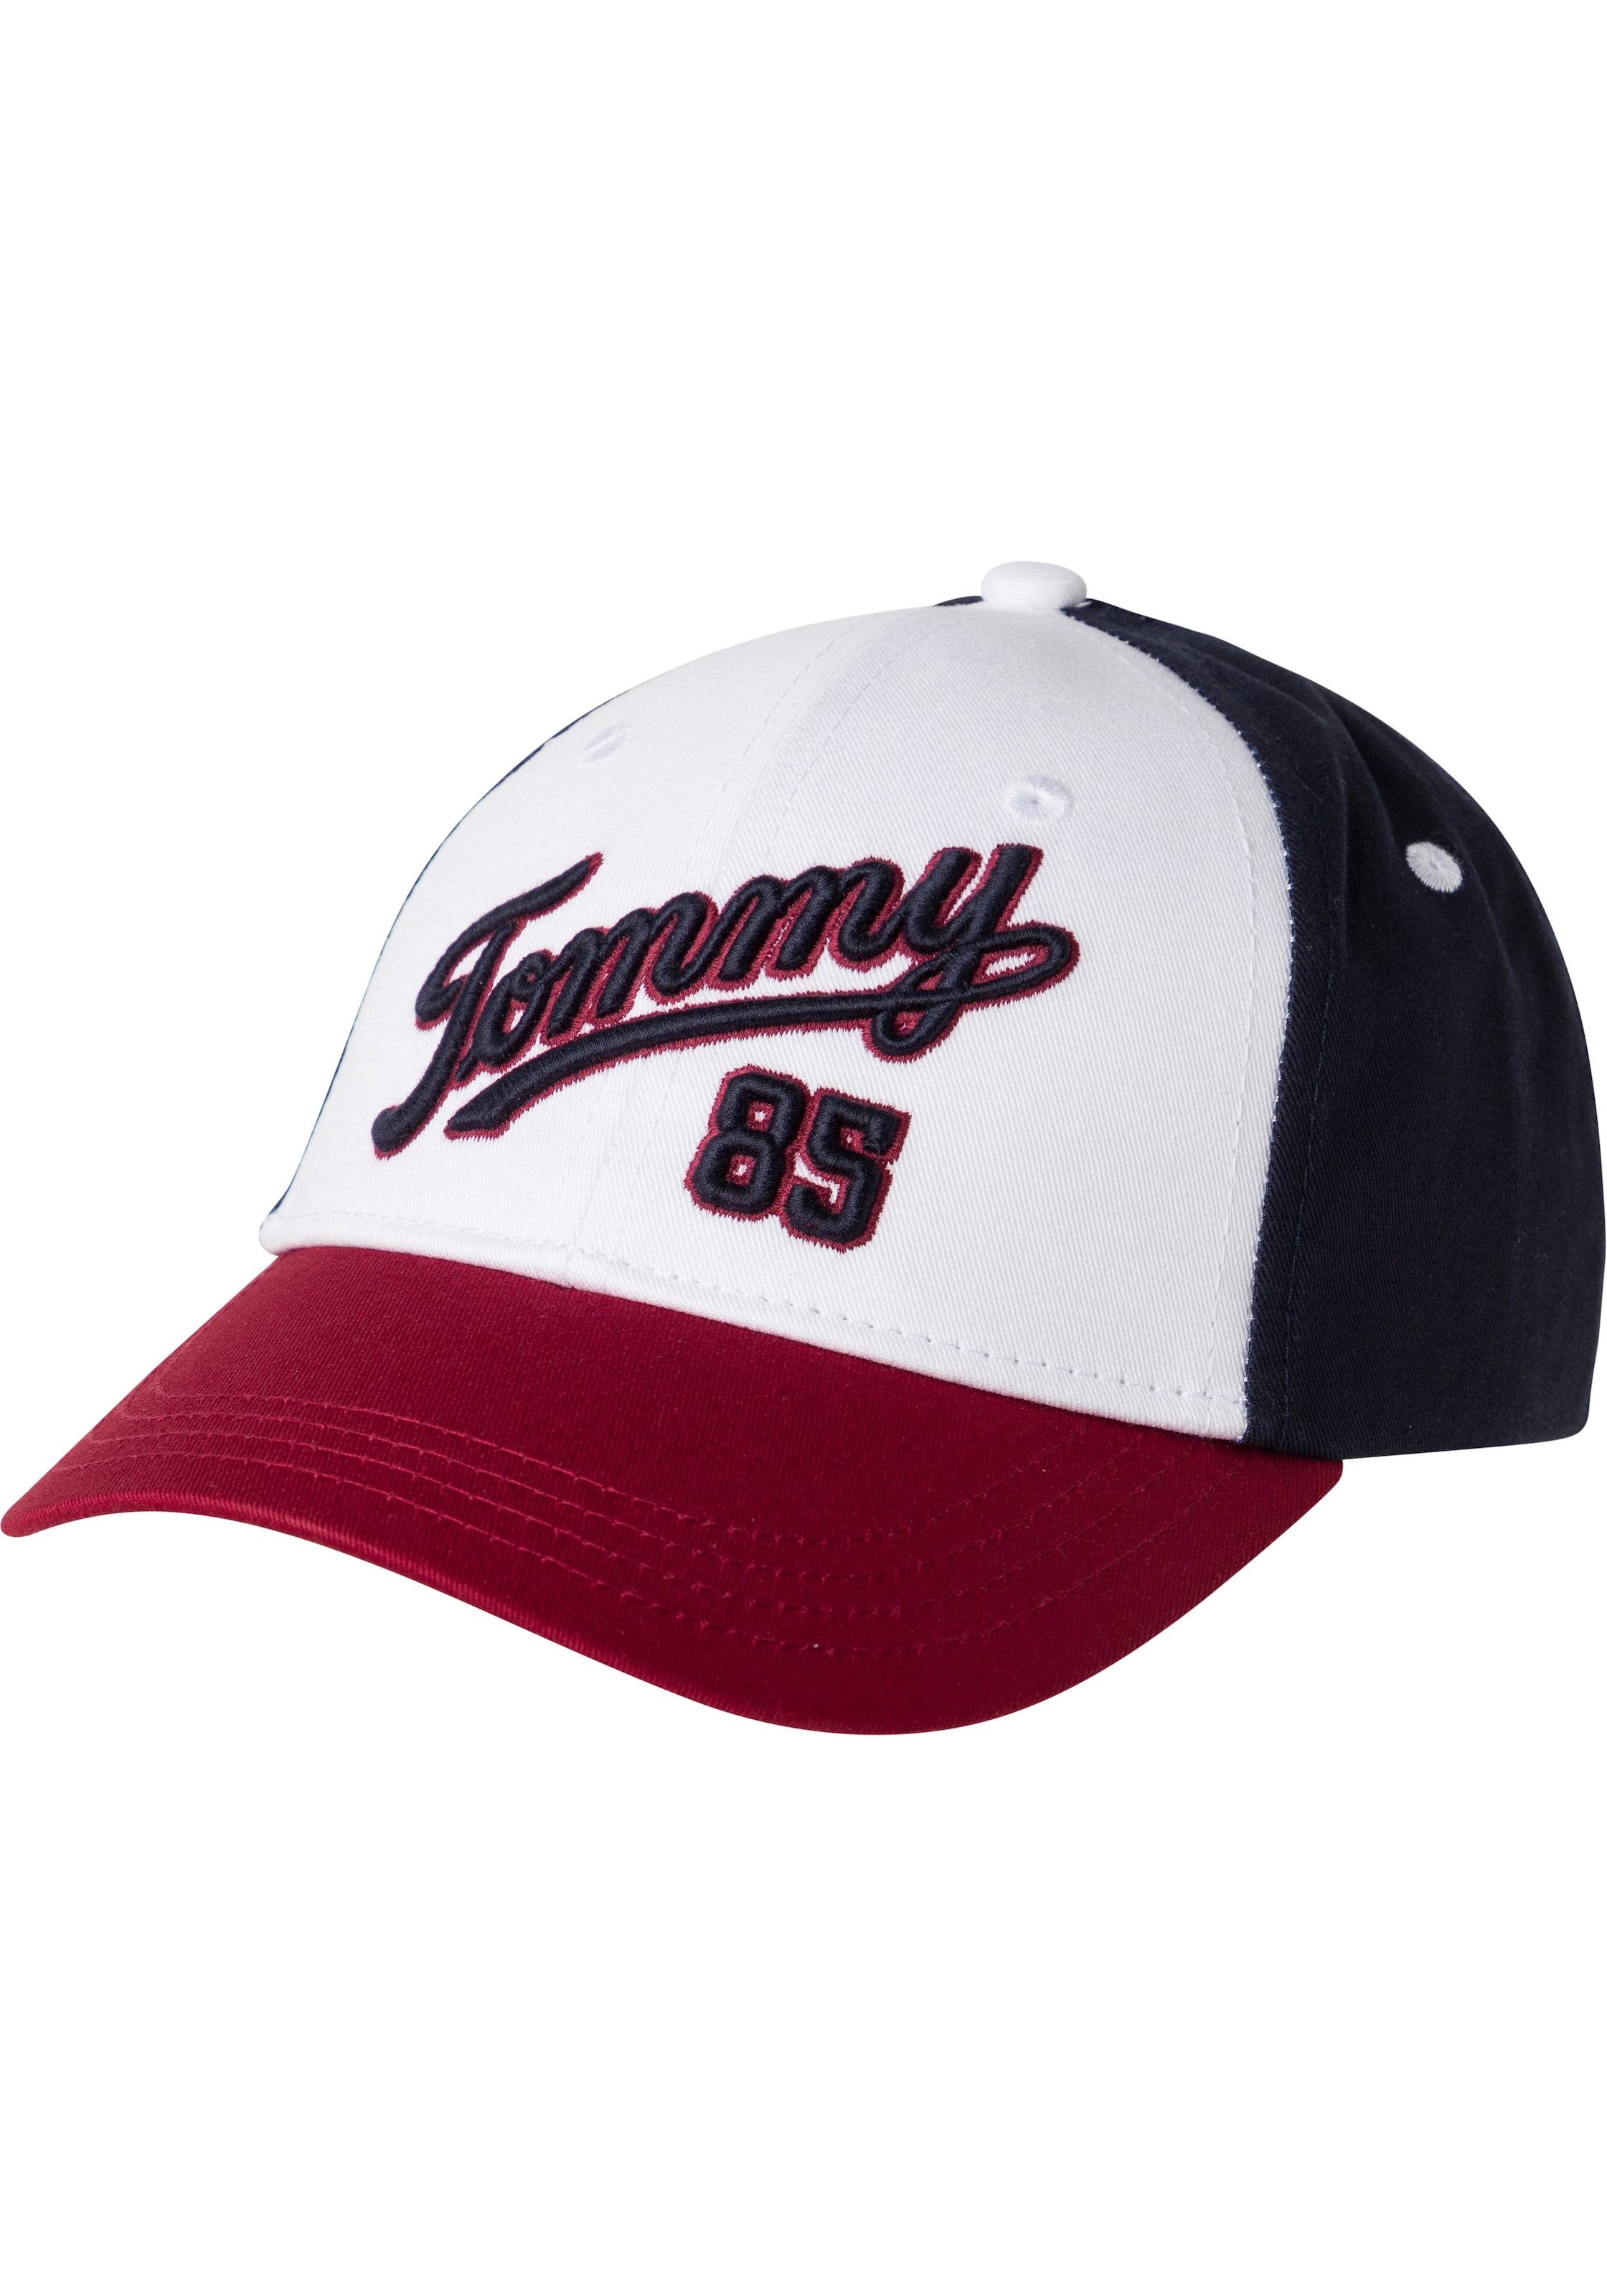 Tommy Hilfiger Trucker Cap, in Logofarben Colorblocking online bei OTTO | Fitted Caps